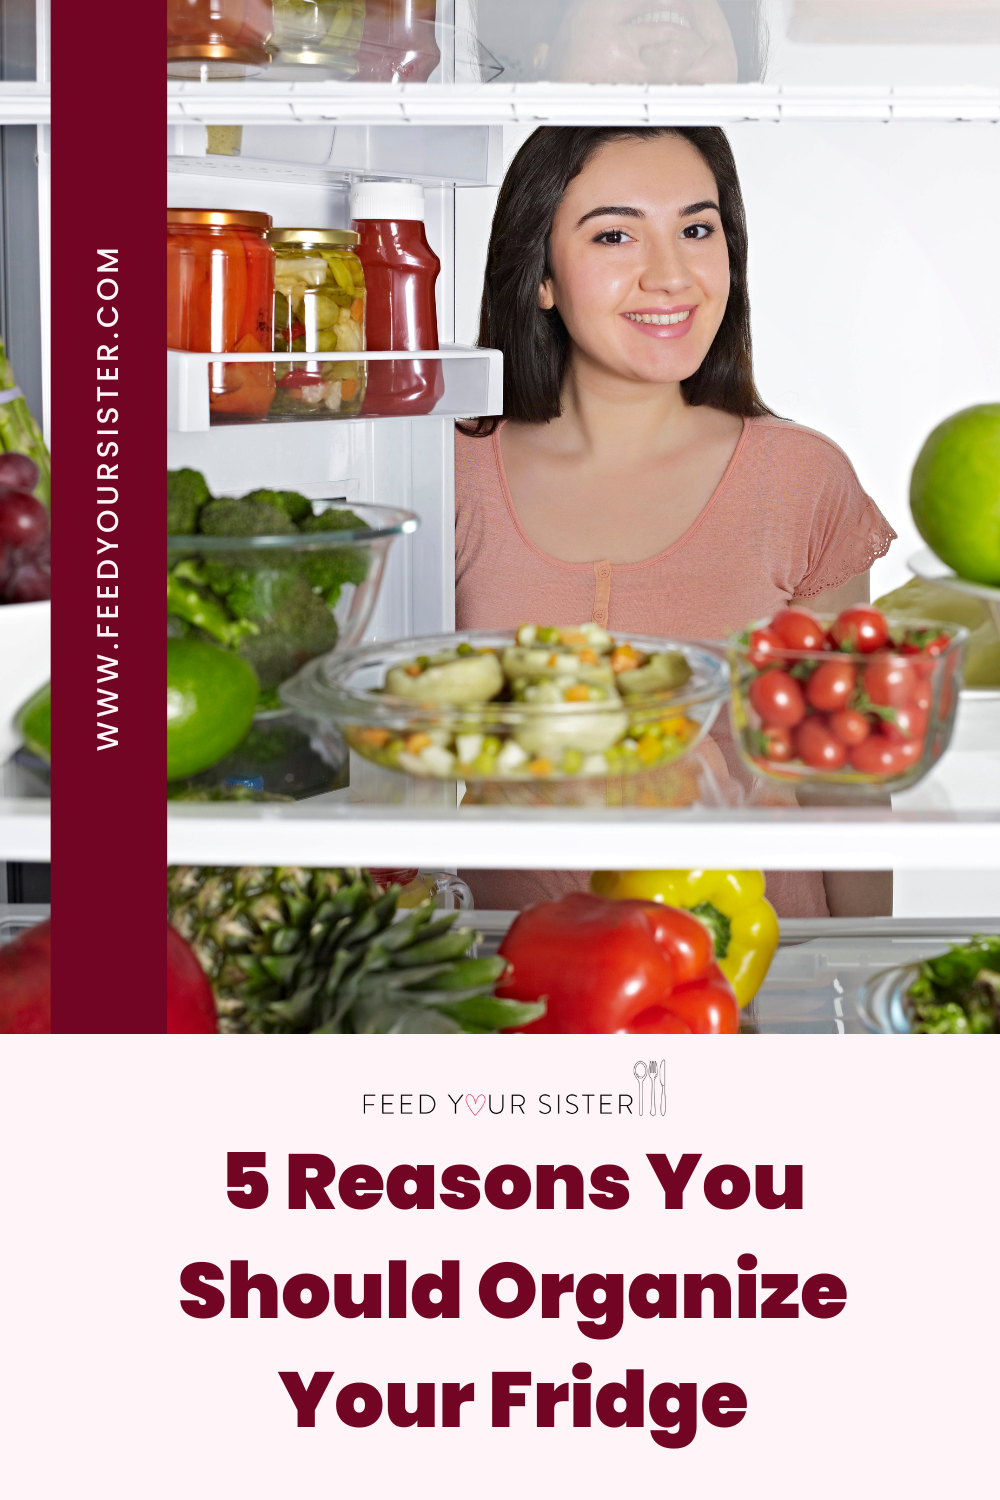 5 Reasons to organize your fridge.png